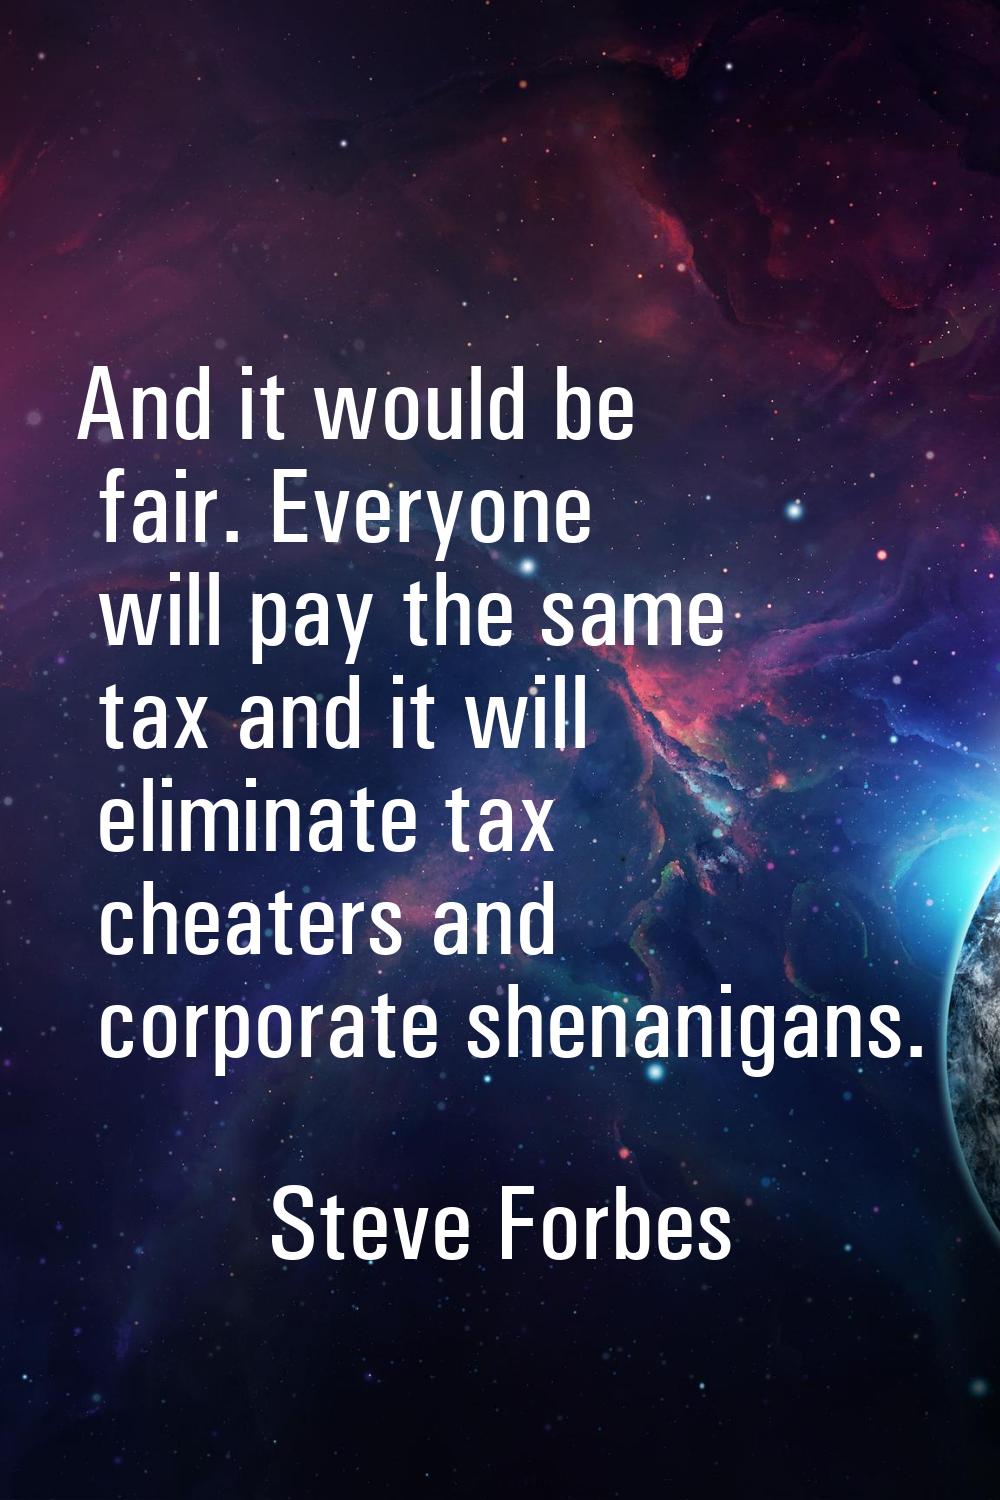 And it would be fair. Everyone will pay the same tax and it will eliminate tax cheaters and corpora